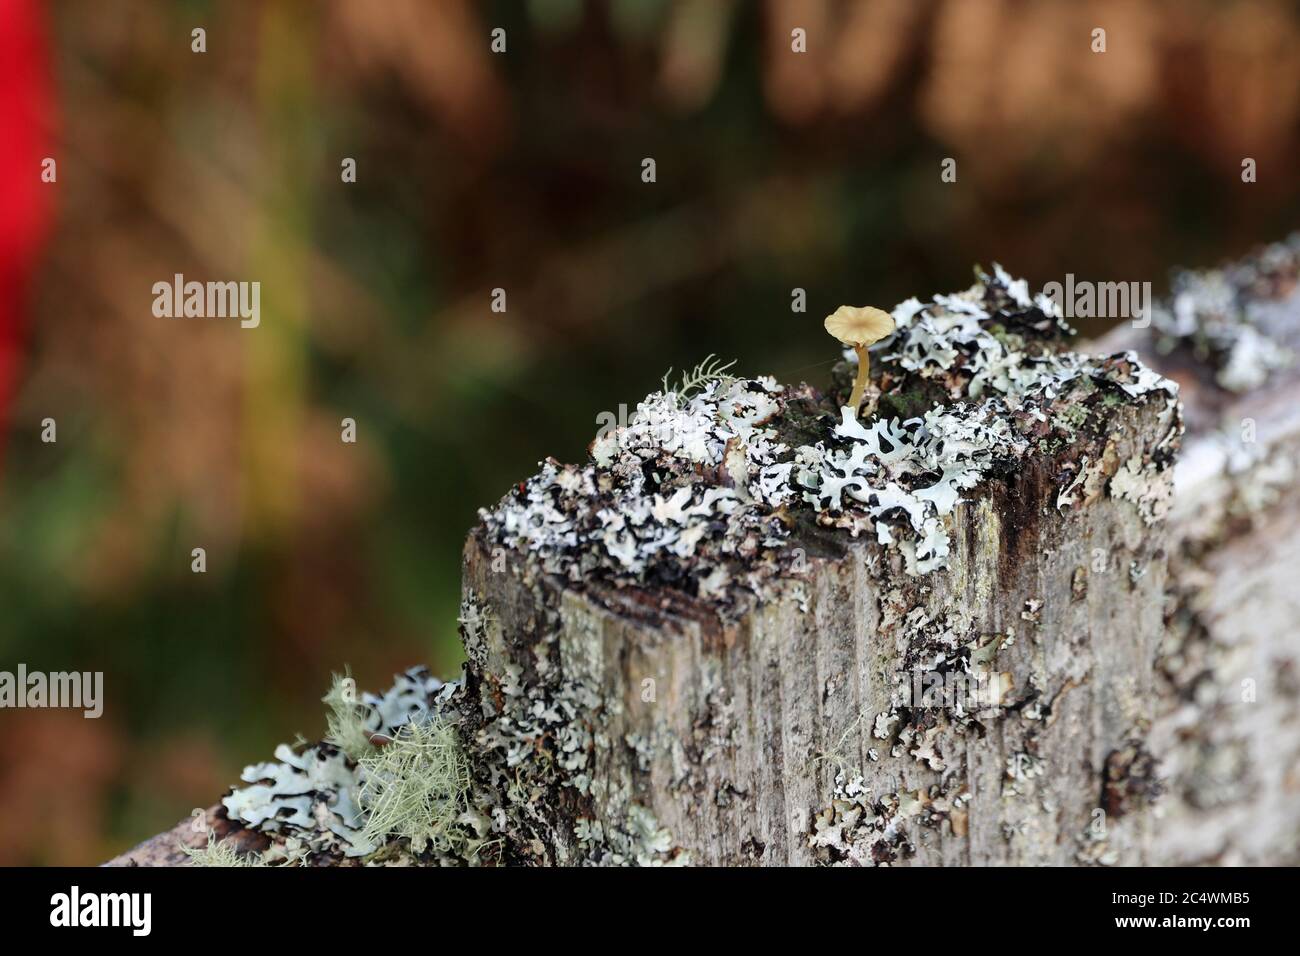 Fence post with lichens and a tiny mushroom. Stock Photo